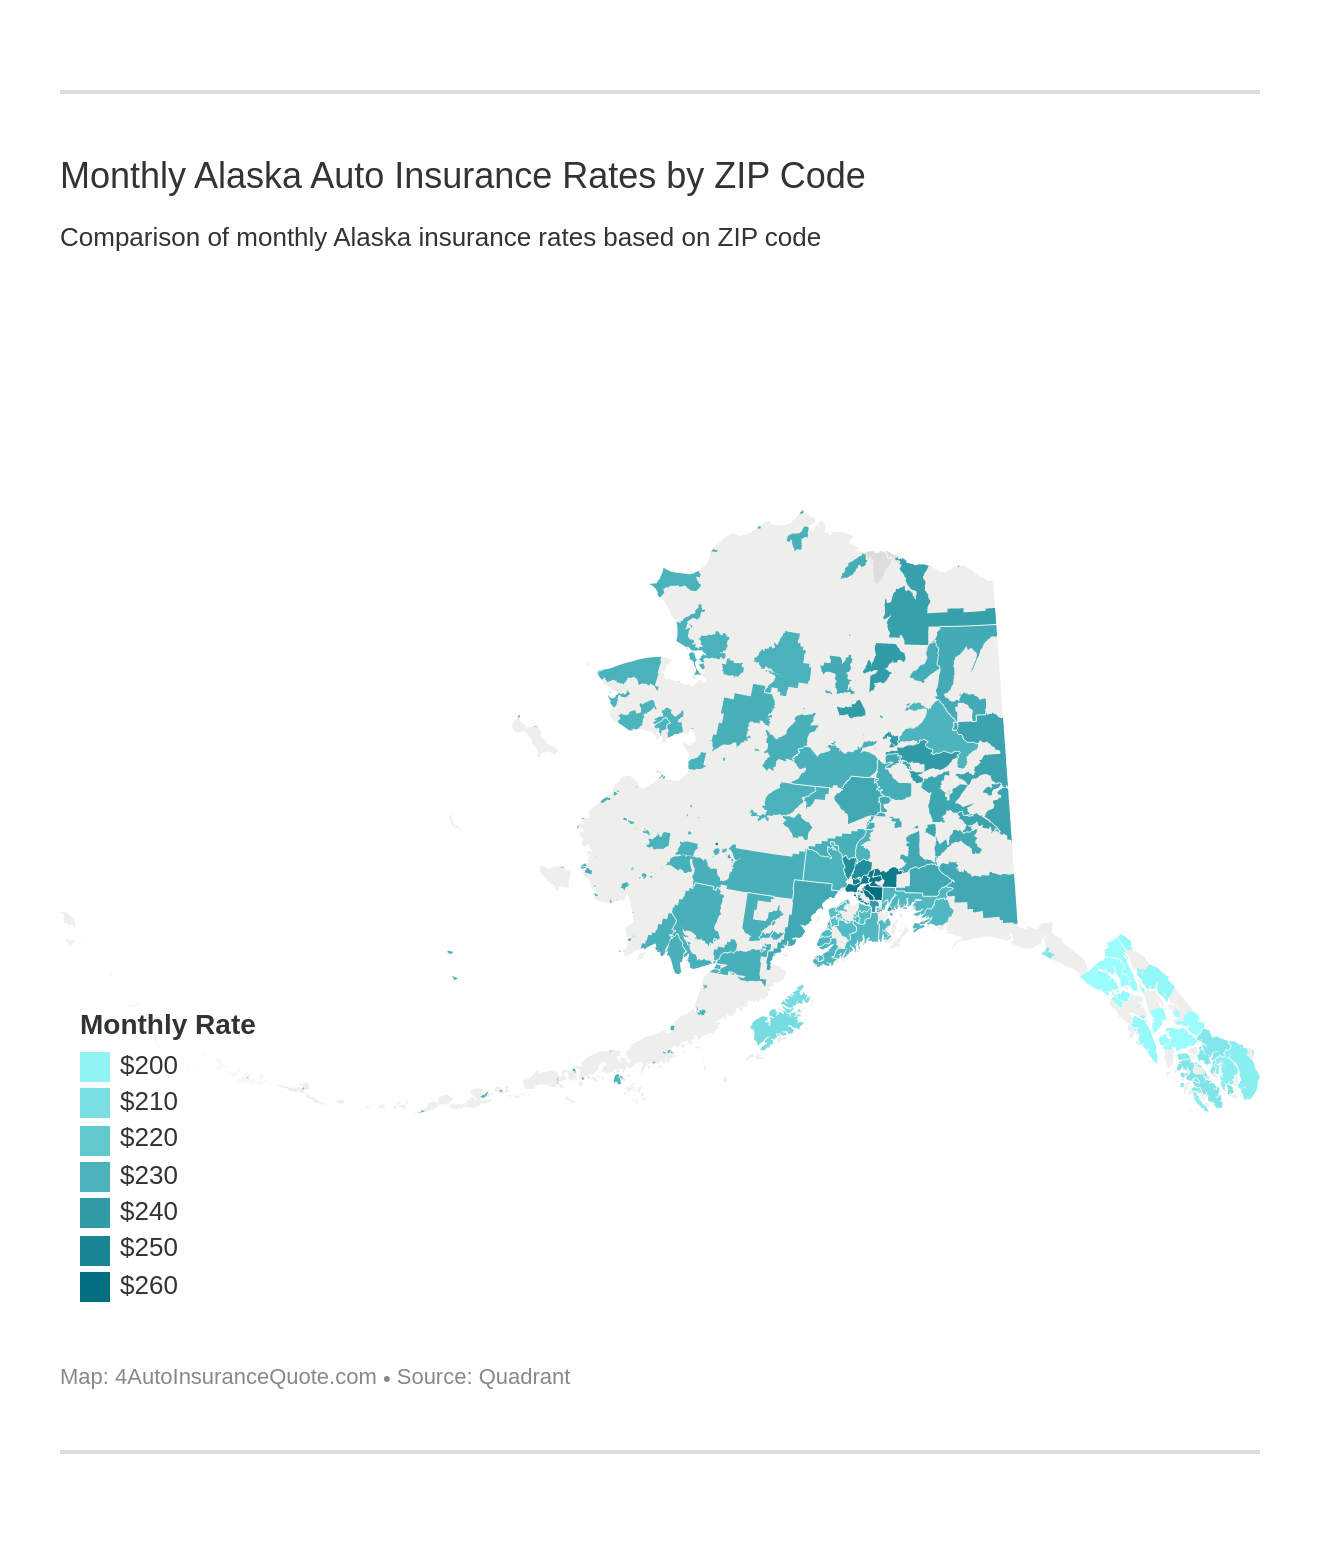 Monthly Alaska Auto Insurance Rates by ZIP Code